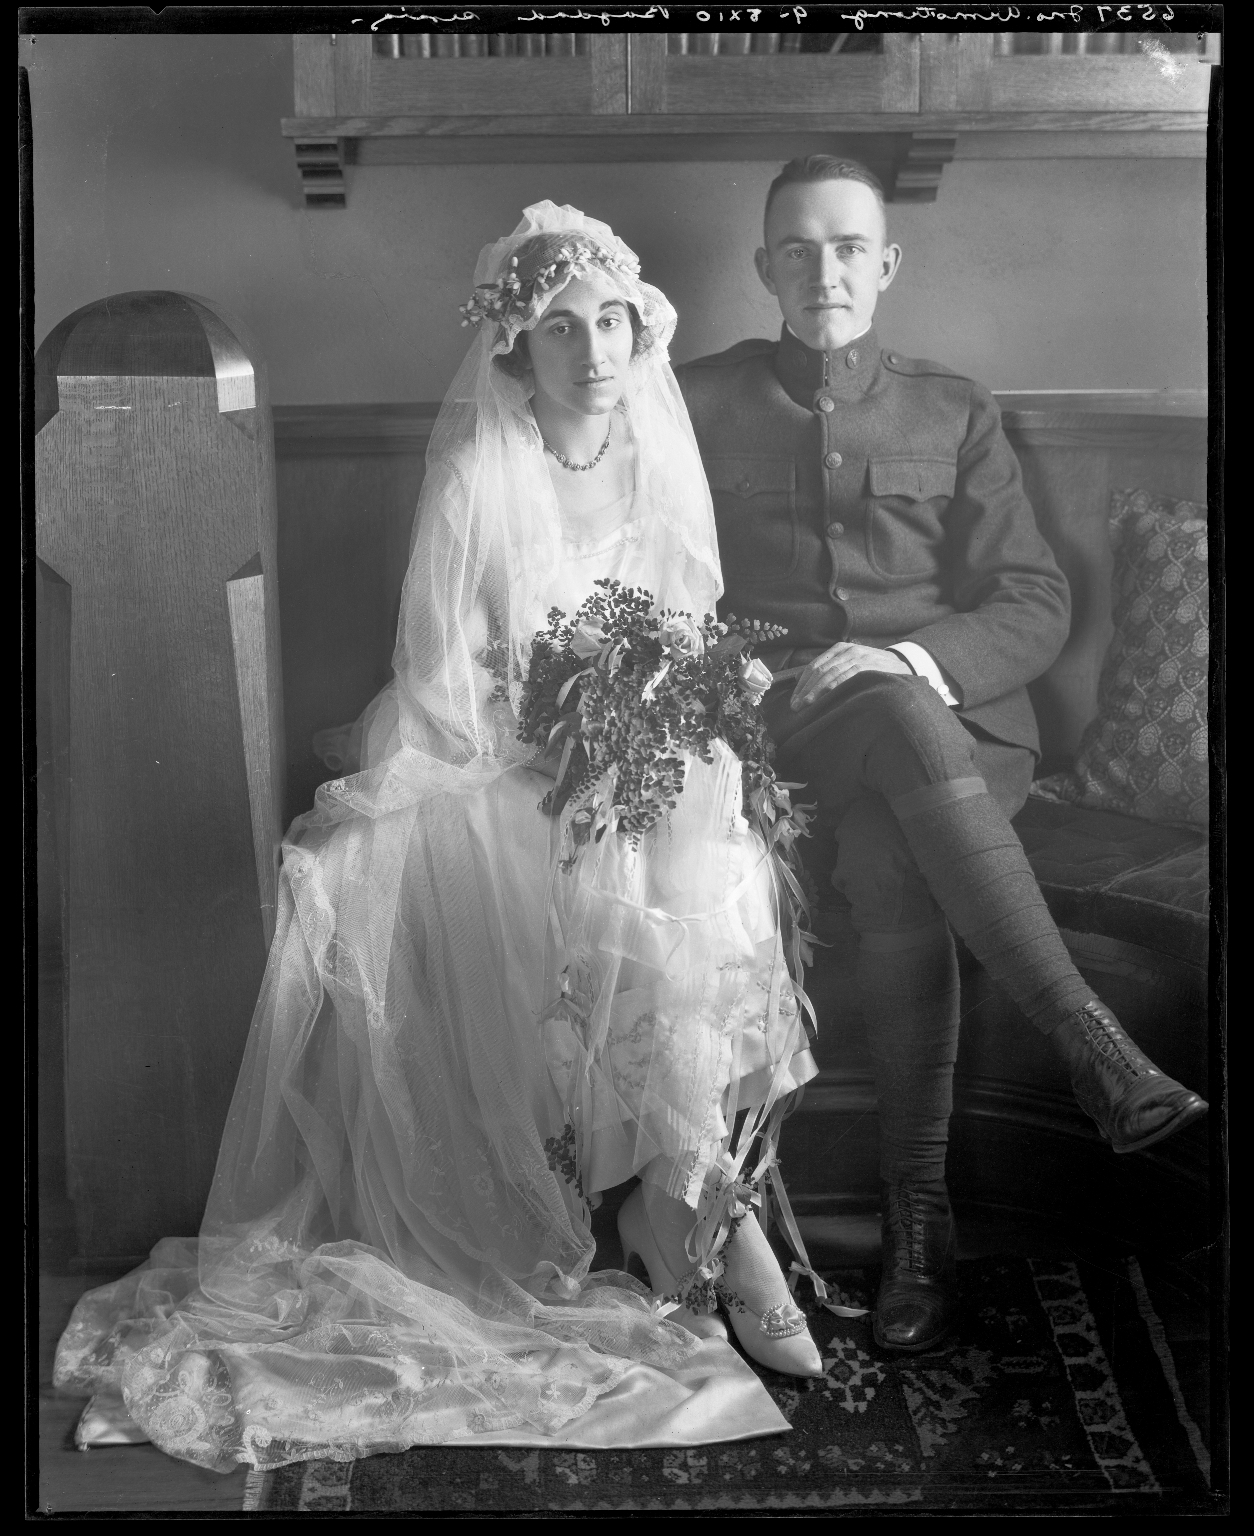 Portraits of unidentified man and woman, probably on their wedding day